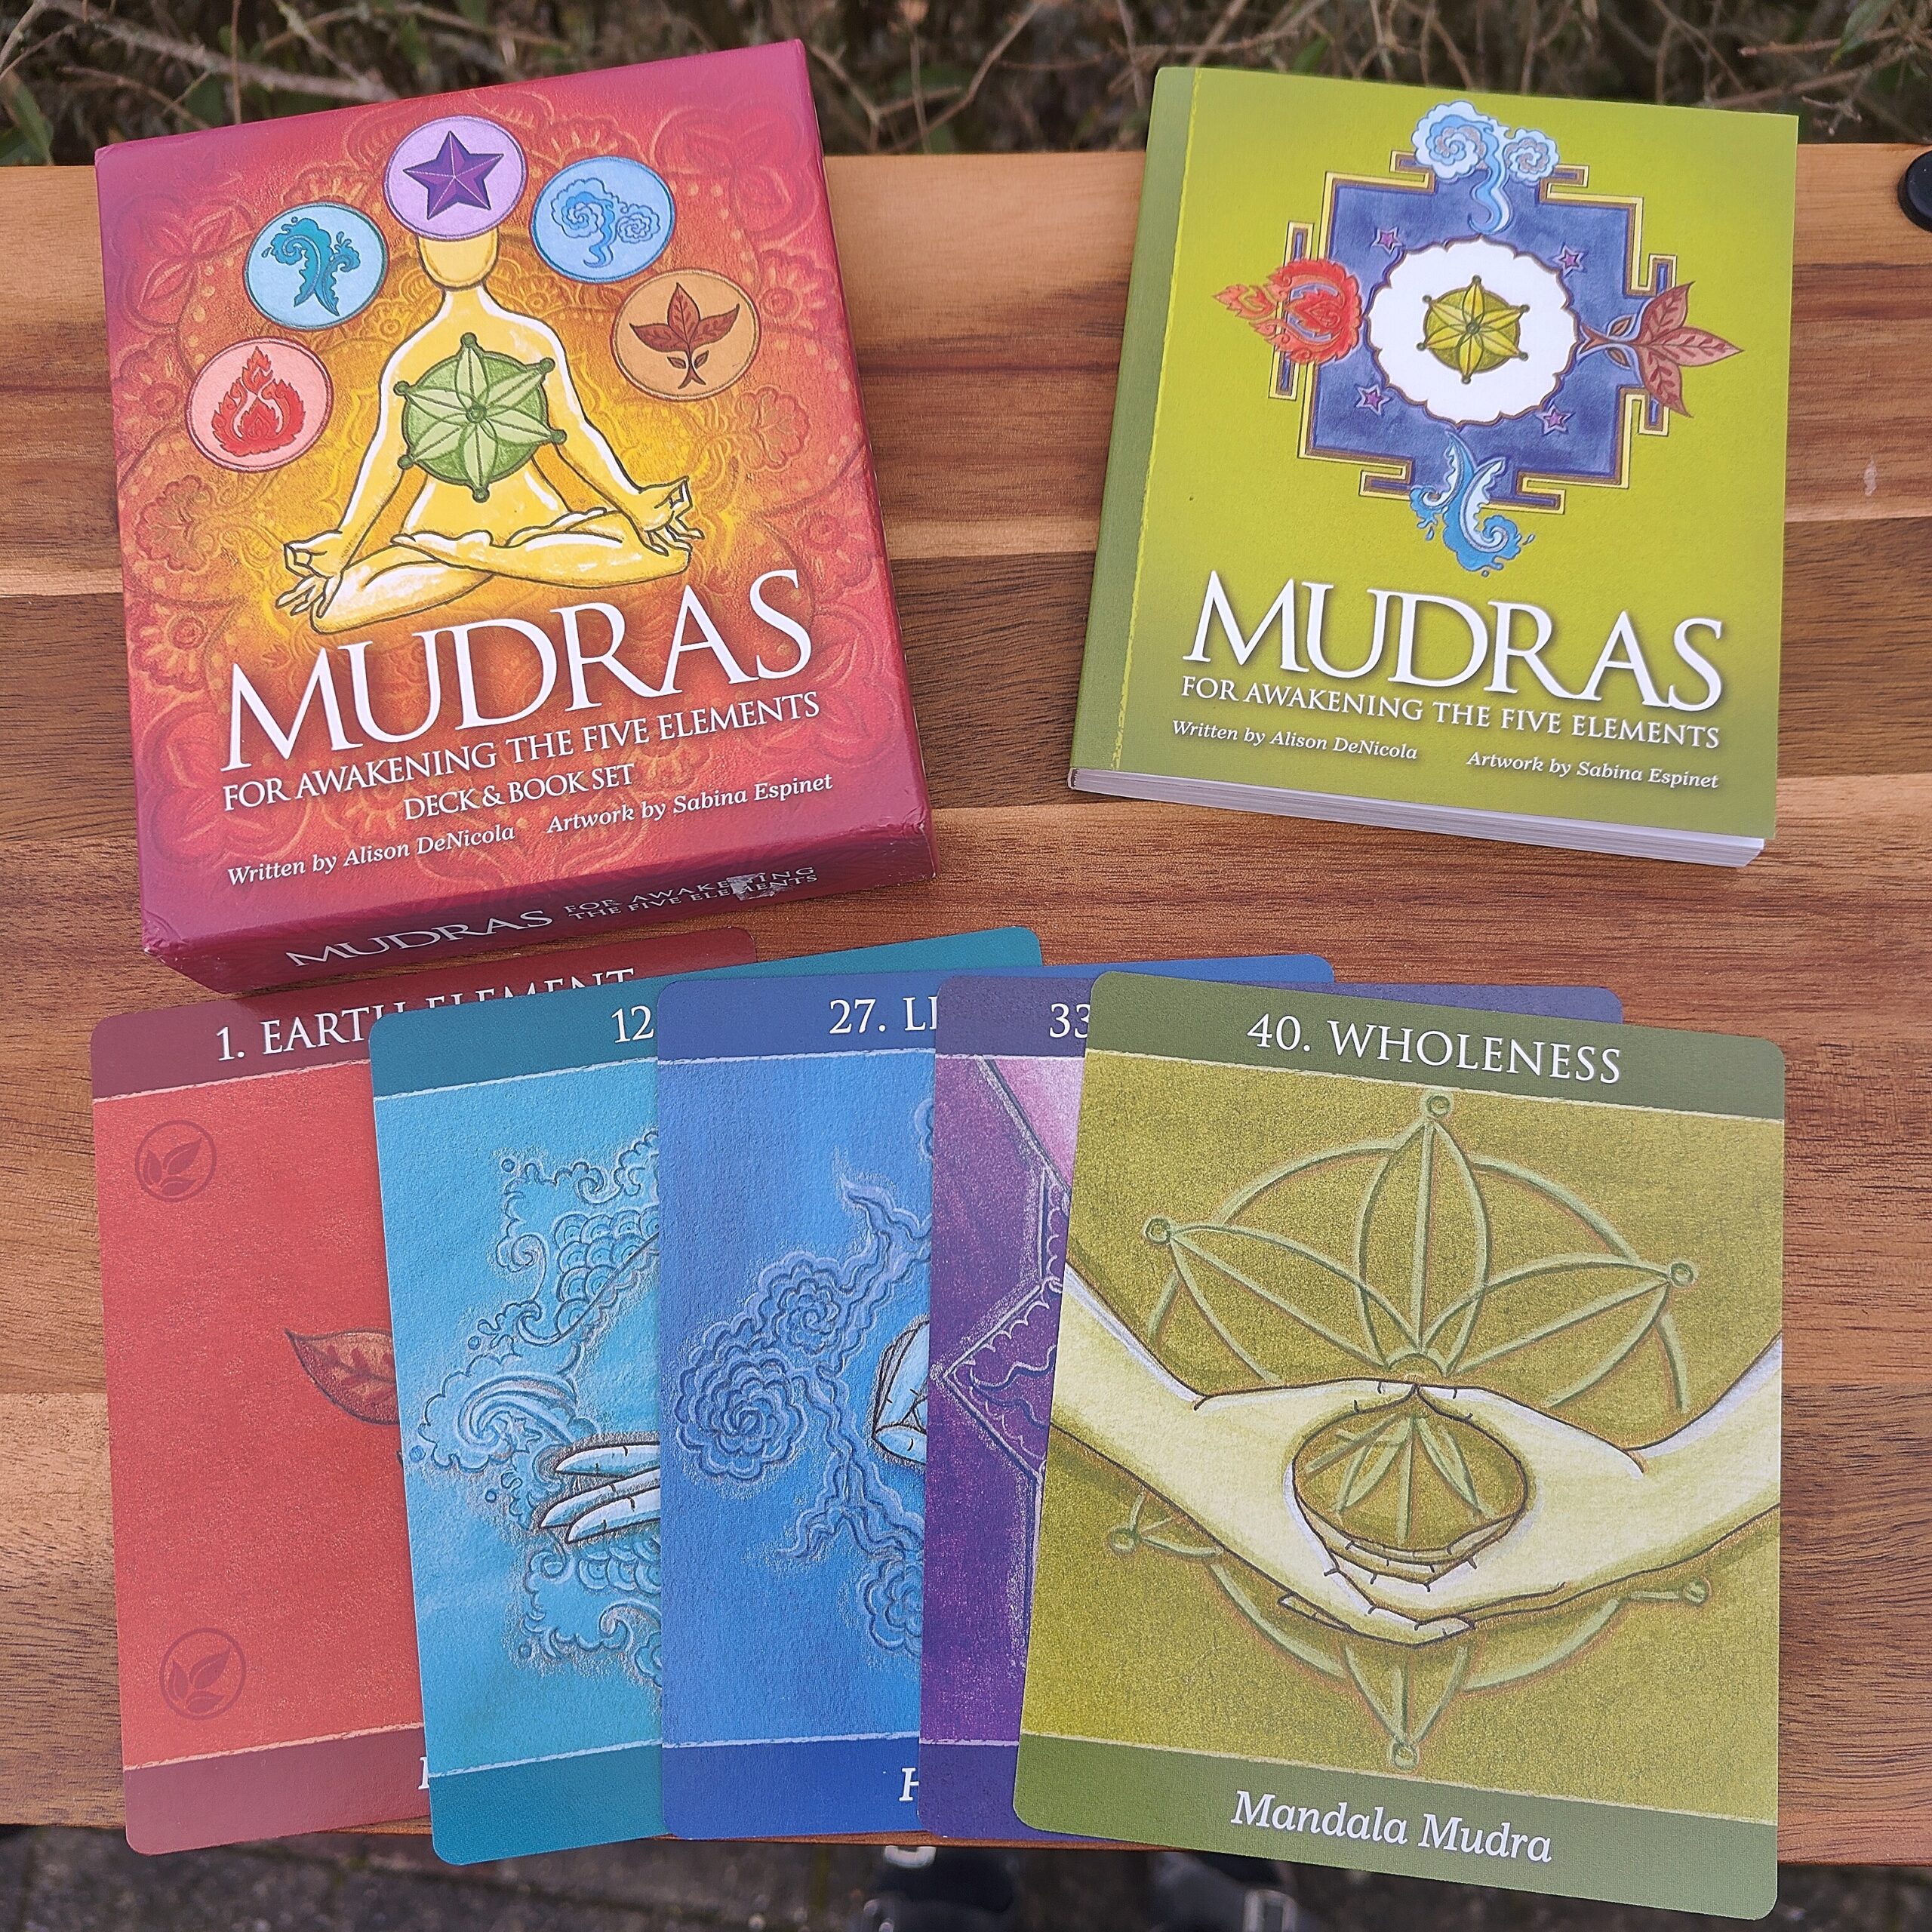 Mudras - For Awakening The Five Elements (2. Hand)